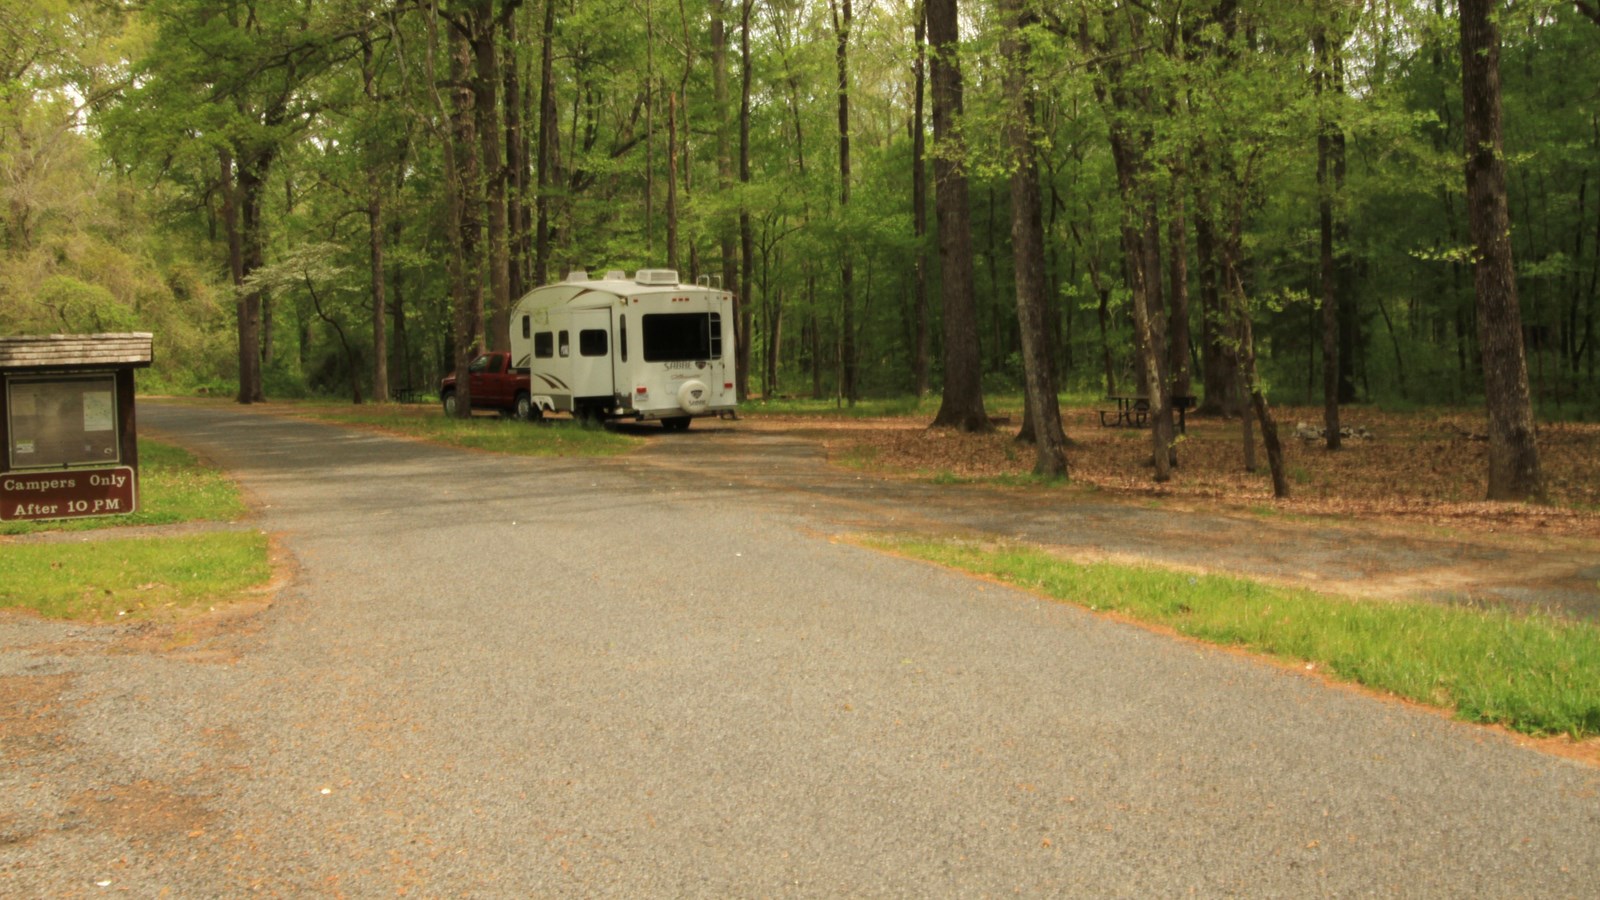 A wooded area with an RV in the distance.